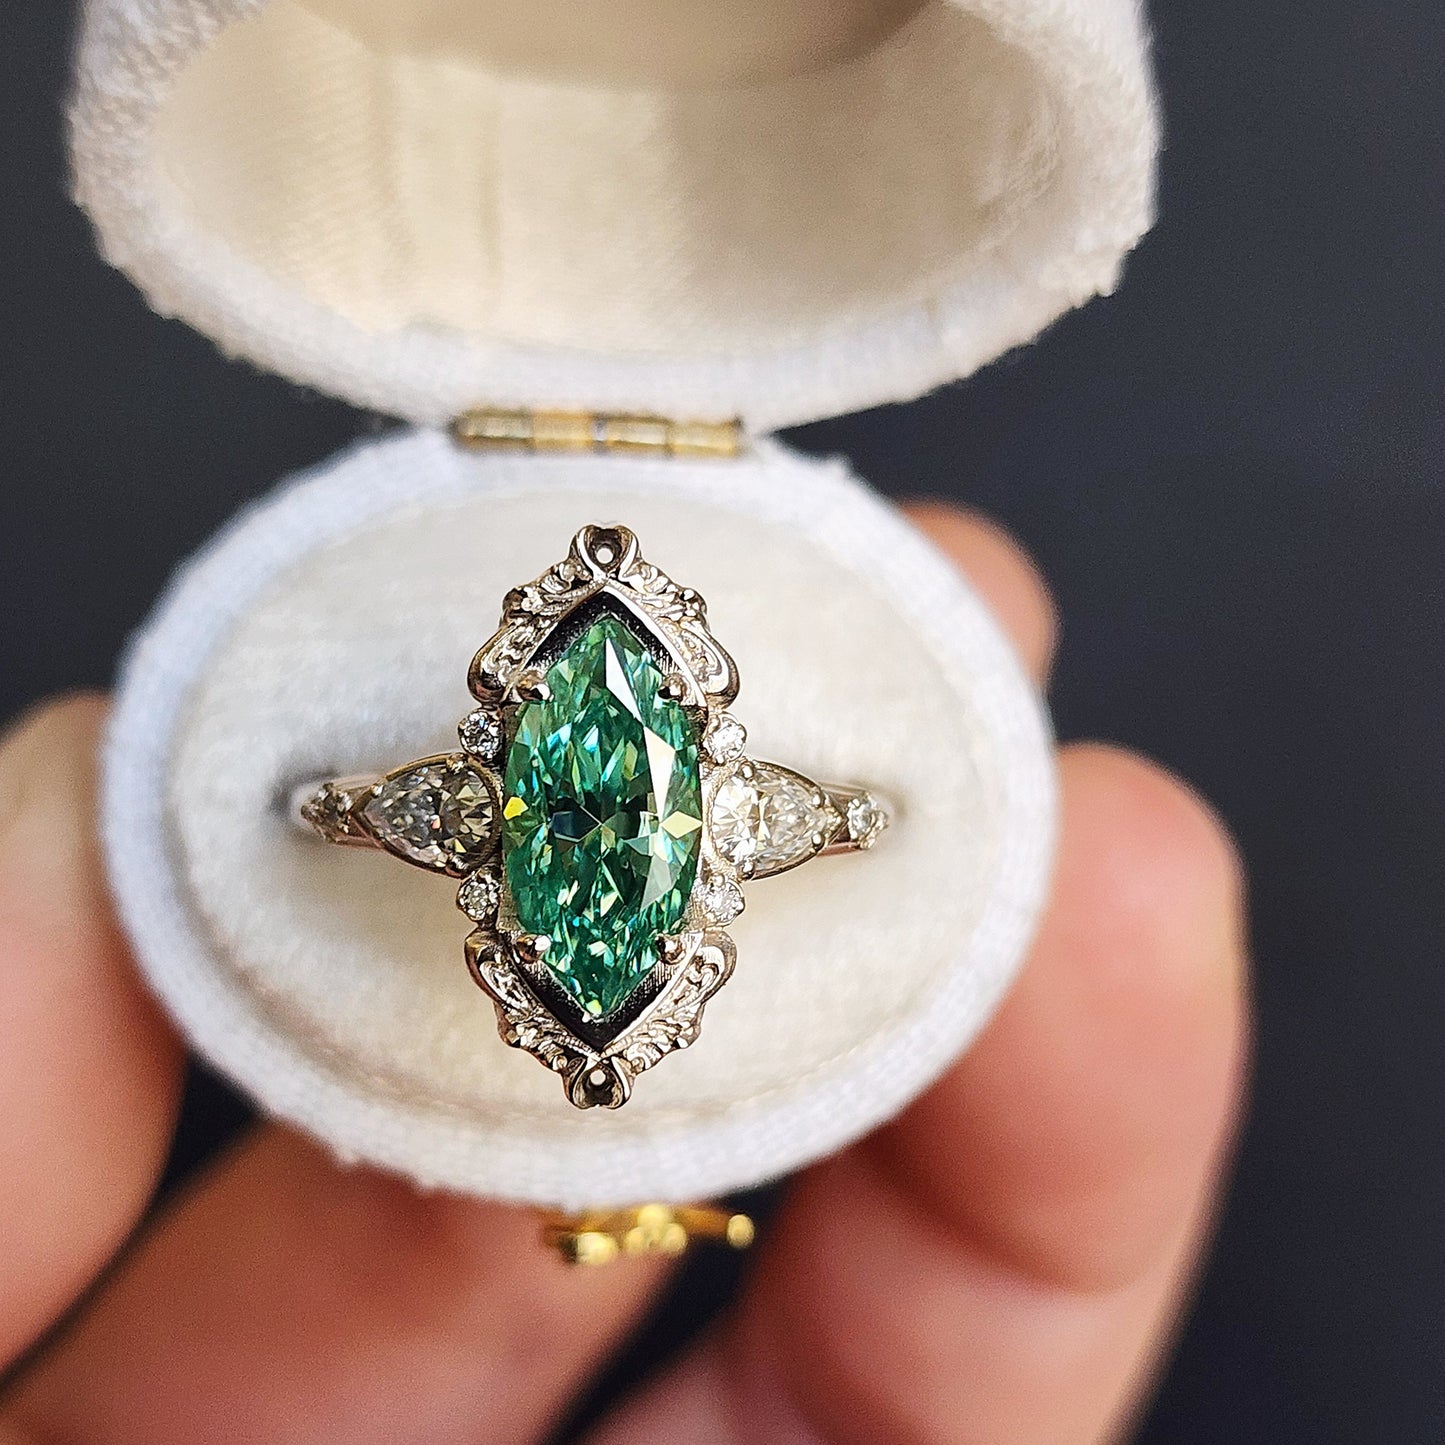 green moissanite marquise odette engagement ring fairytale jewelry color gemstone ring filigree 